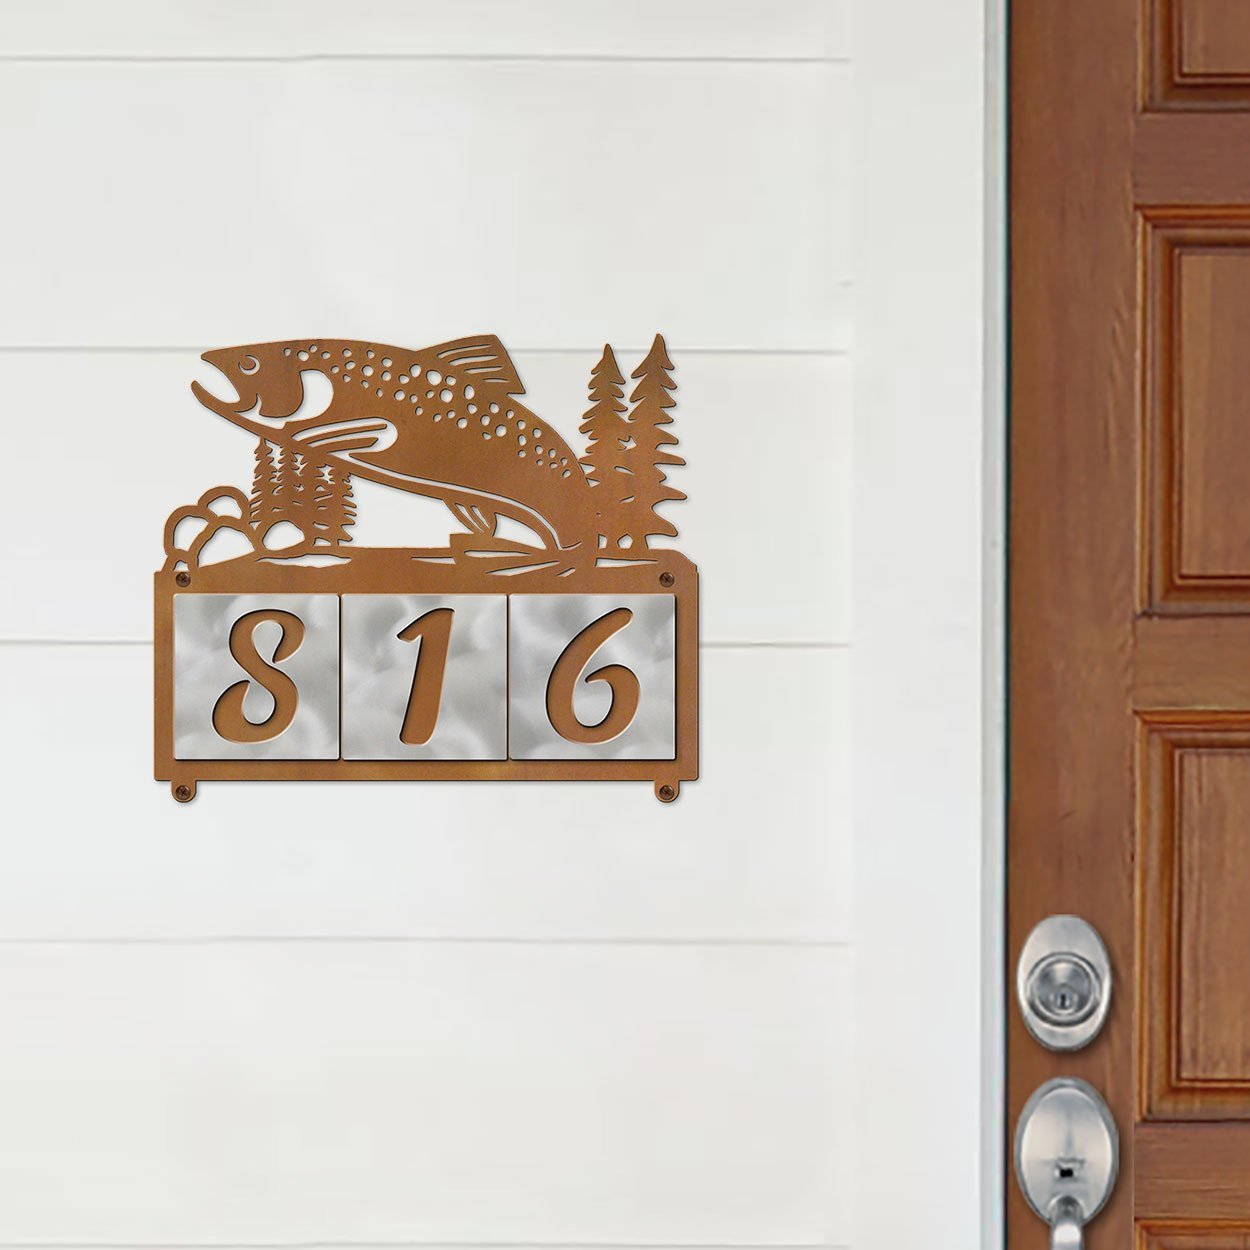 609253 - XL Jumping Trout in Stream Design 3-Digit Horizontal 6in Tile Outdoor House Numbers